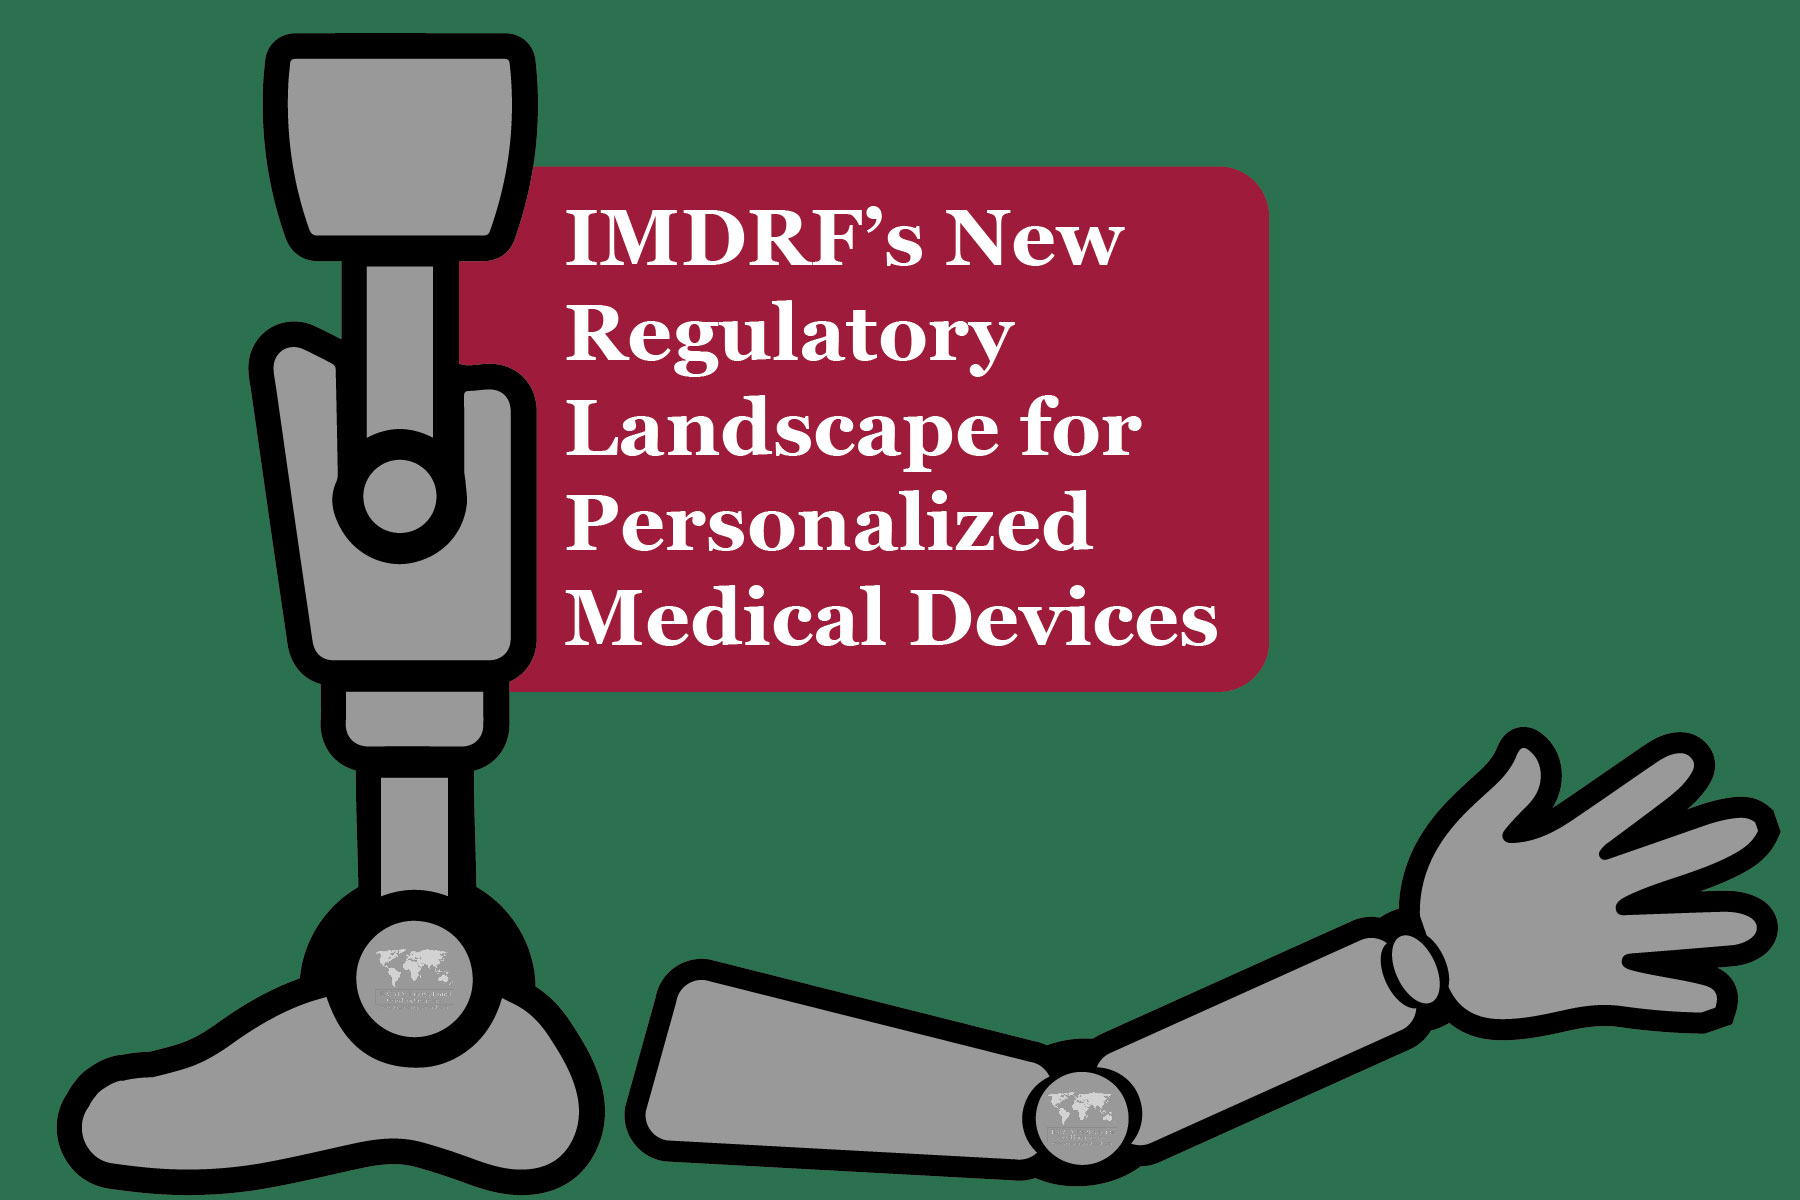 Prosthetic medical devices that can be personalized under IMDRF